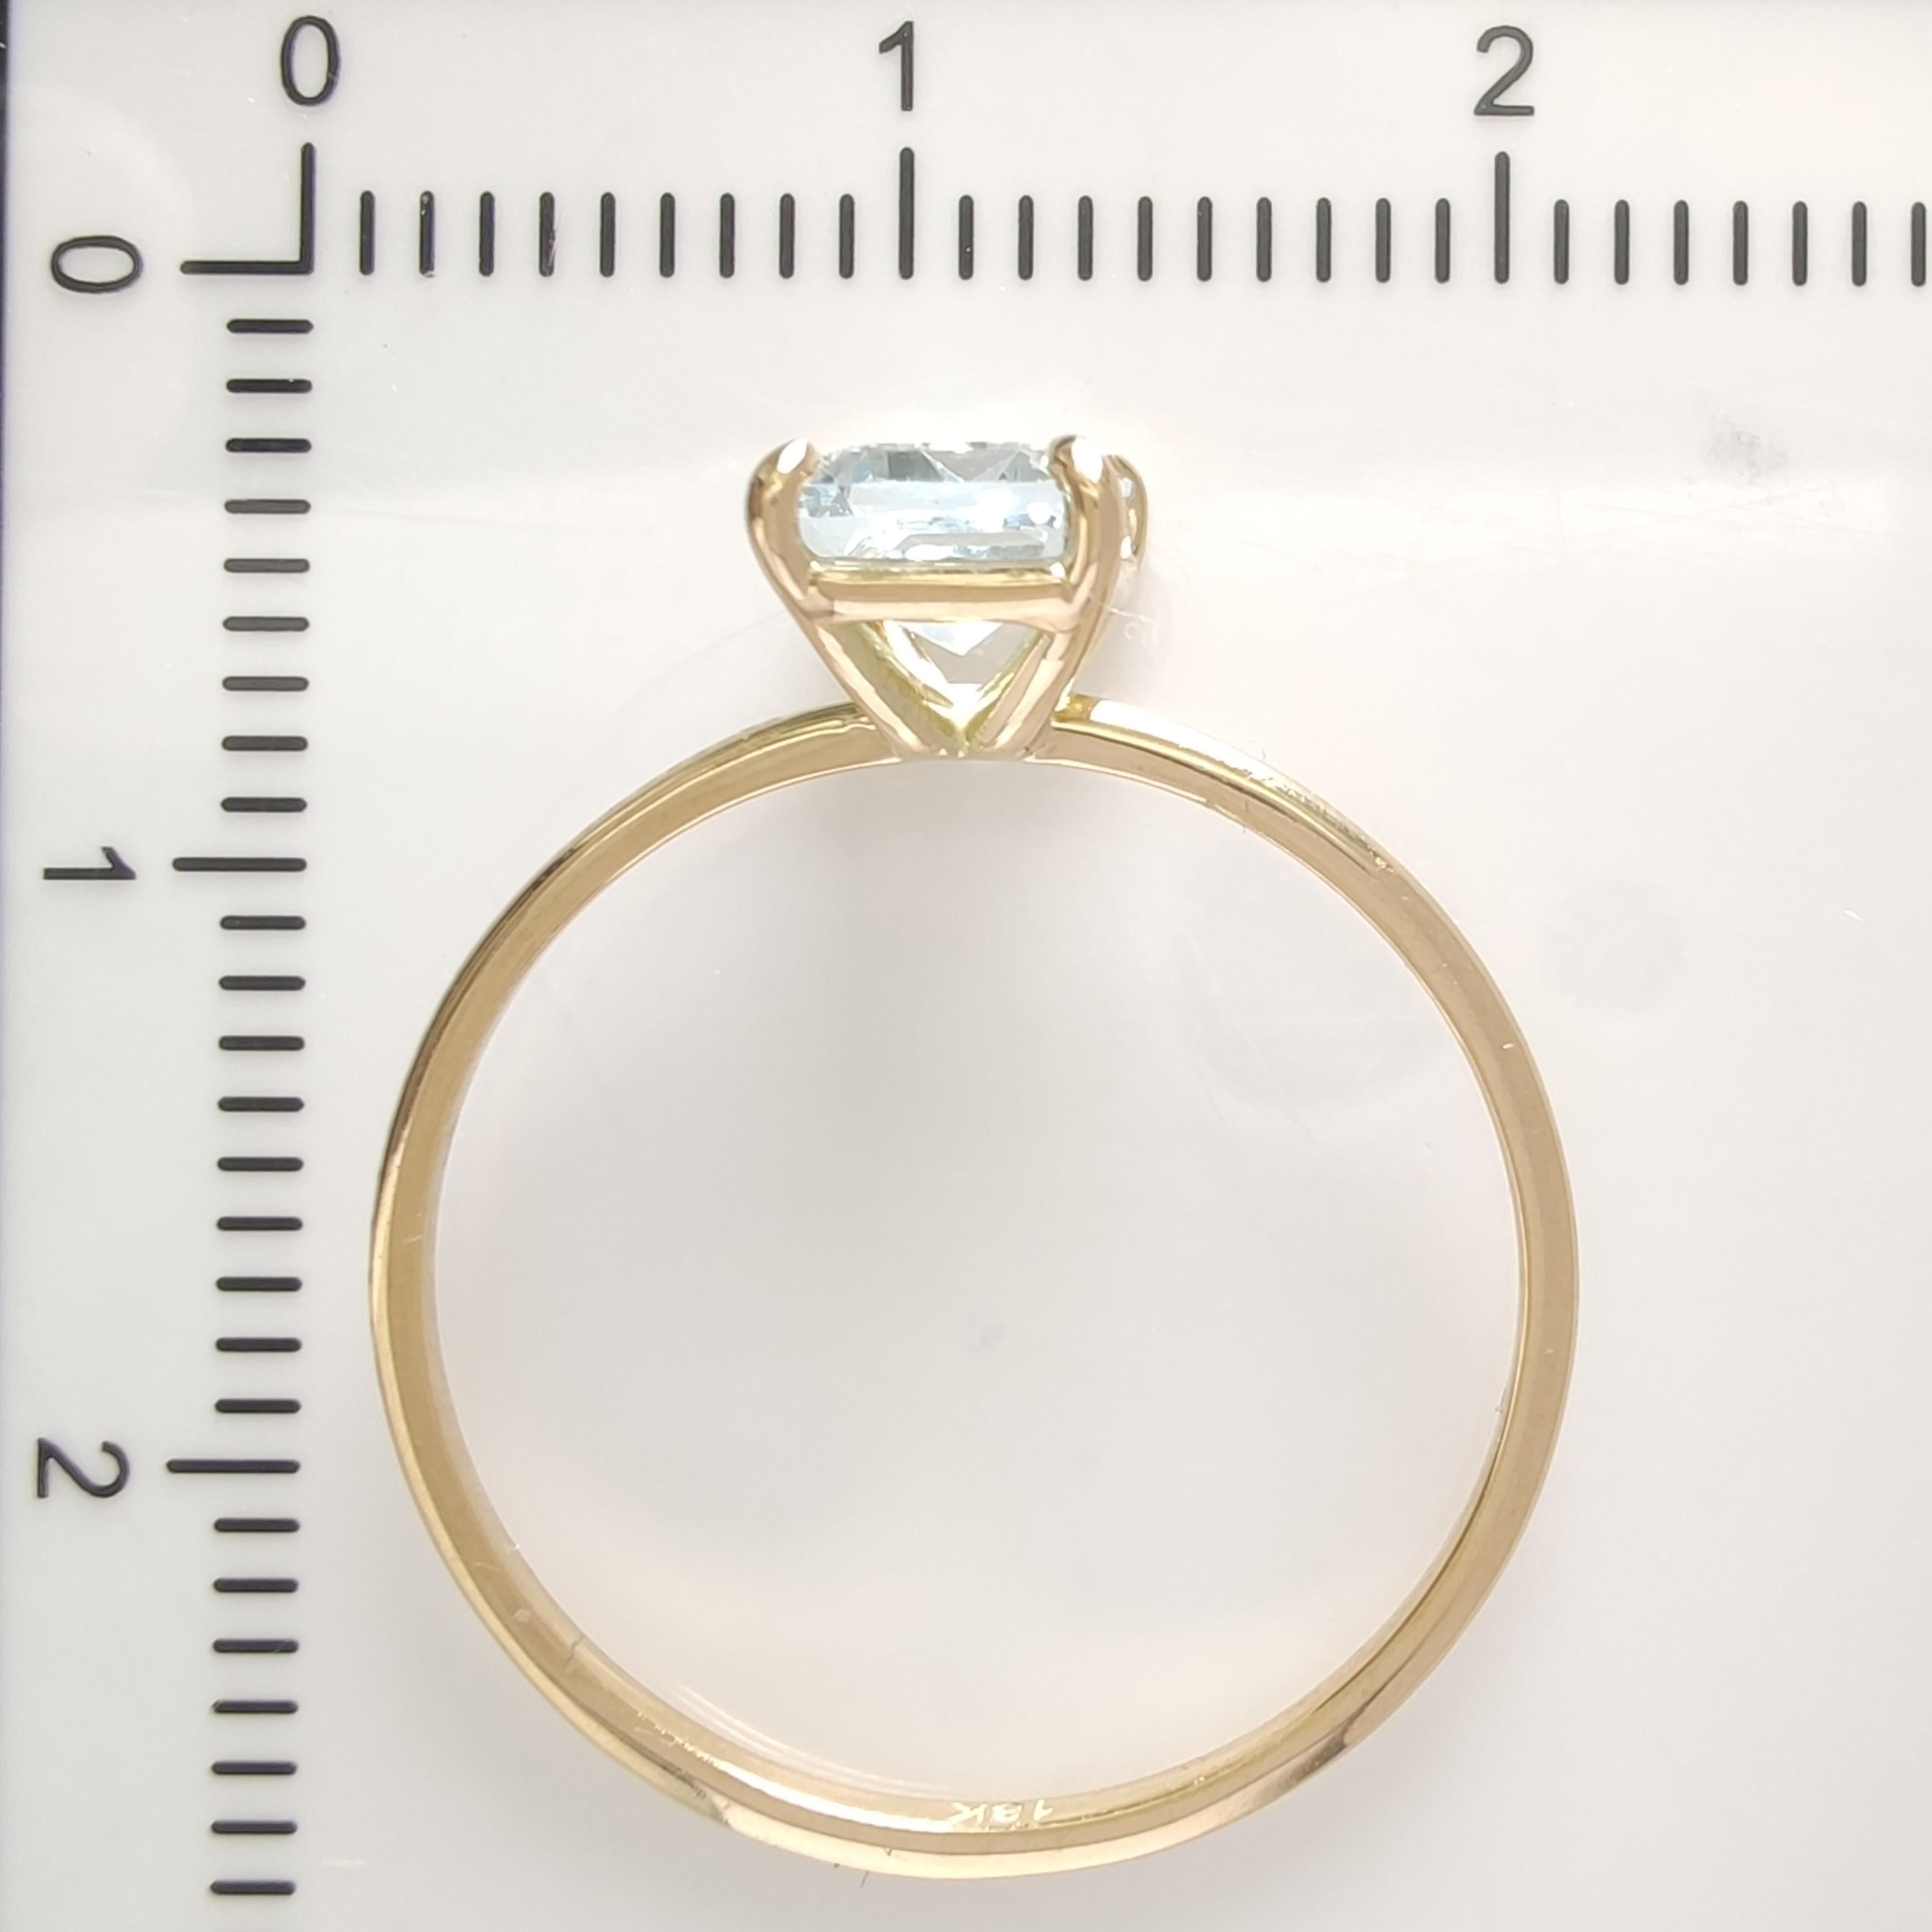 Captivating 18K Gold Solitaire Ring featuring a 0.83 Ct. Emerald-Cut Aquamarine For Sale 7